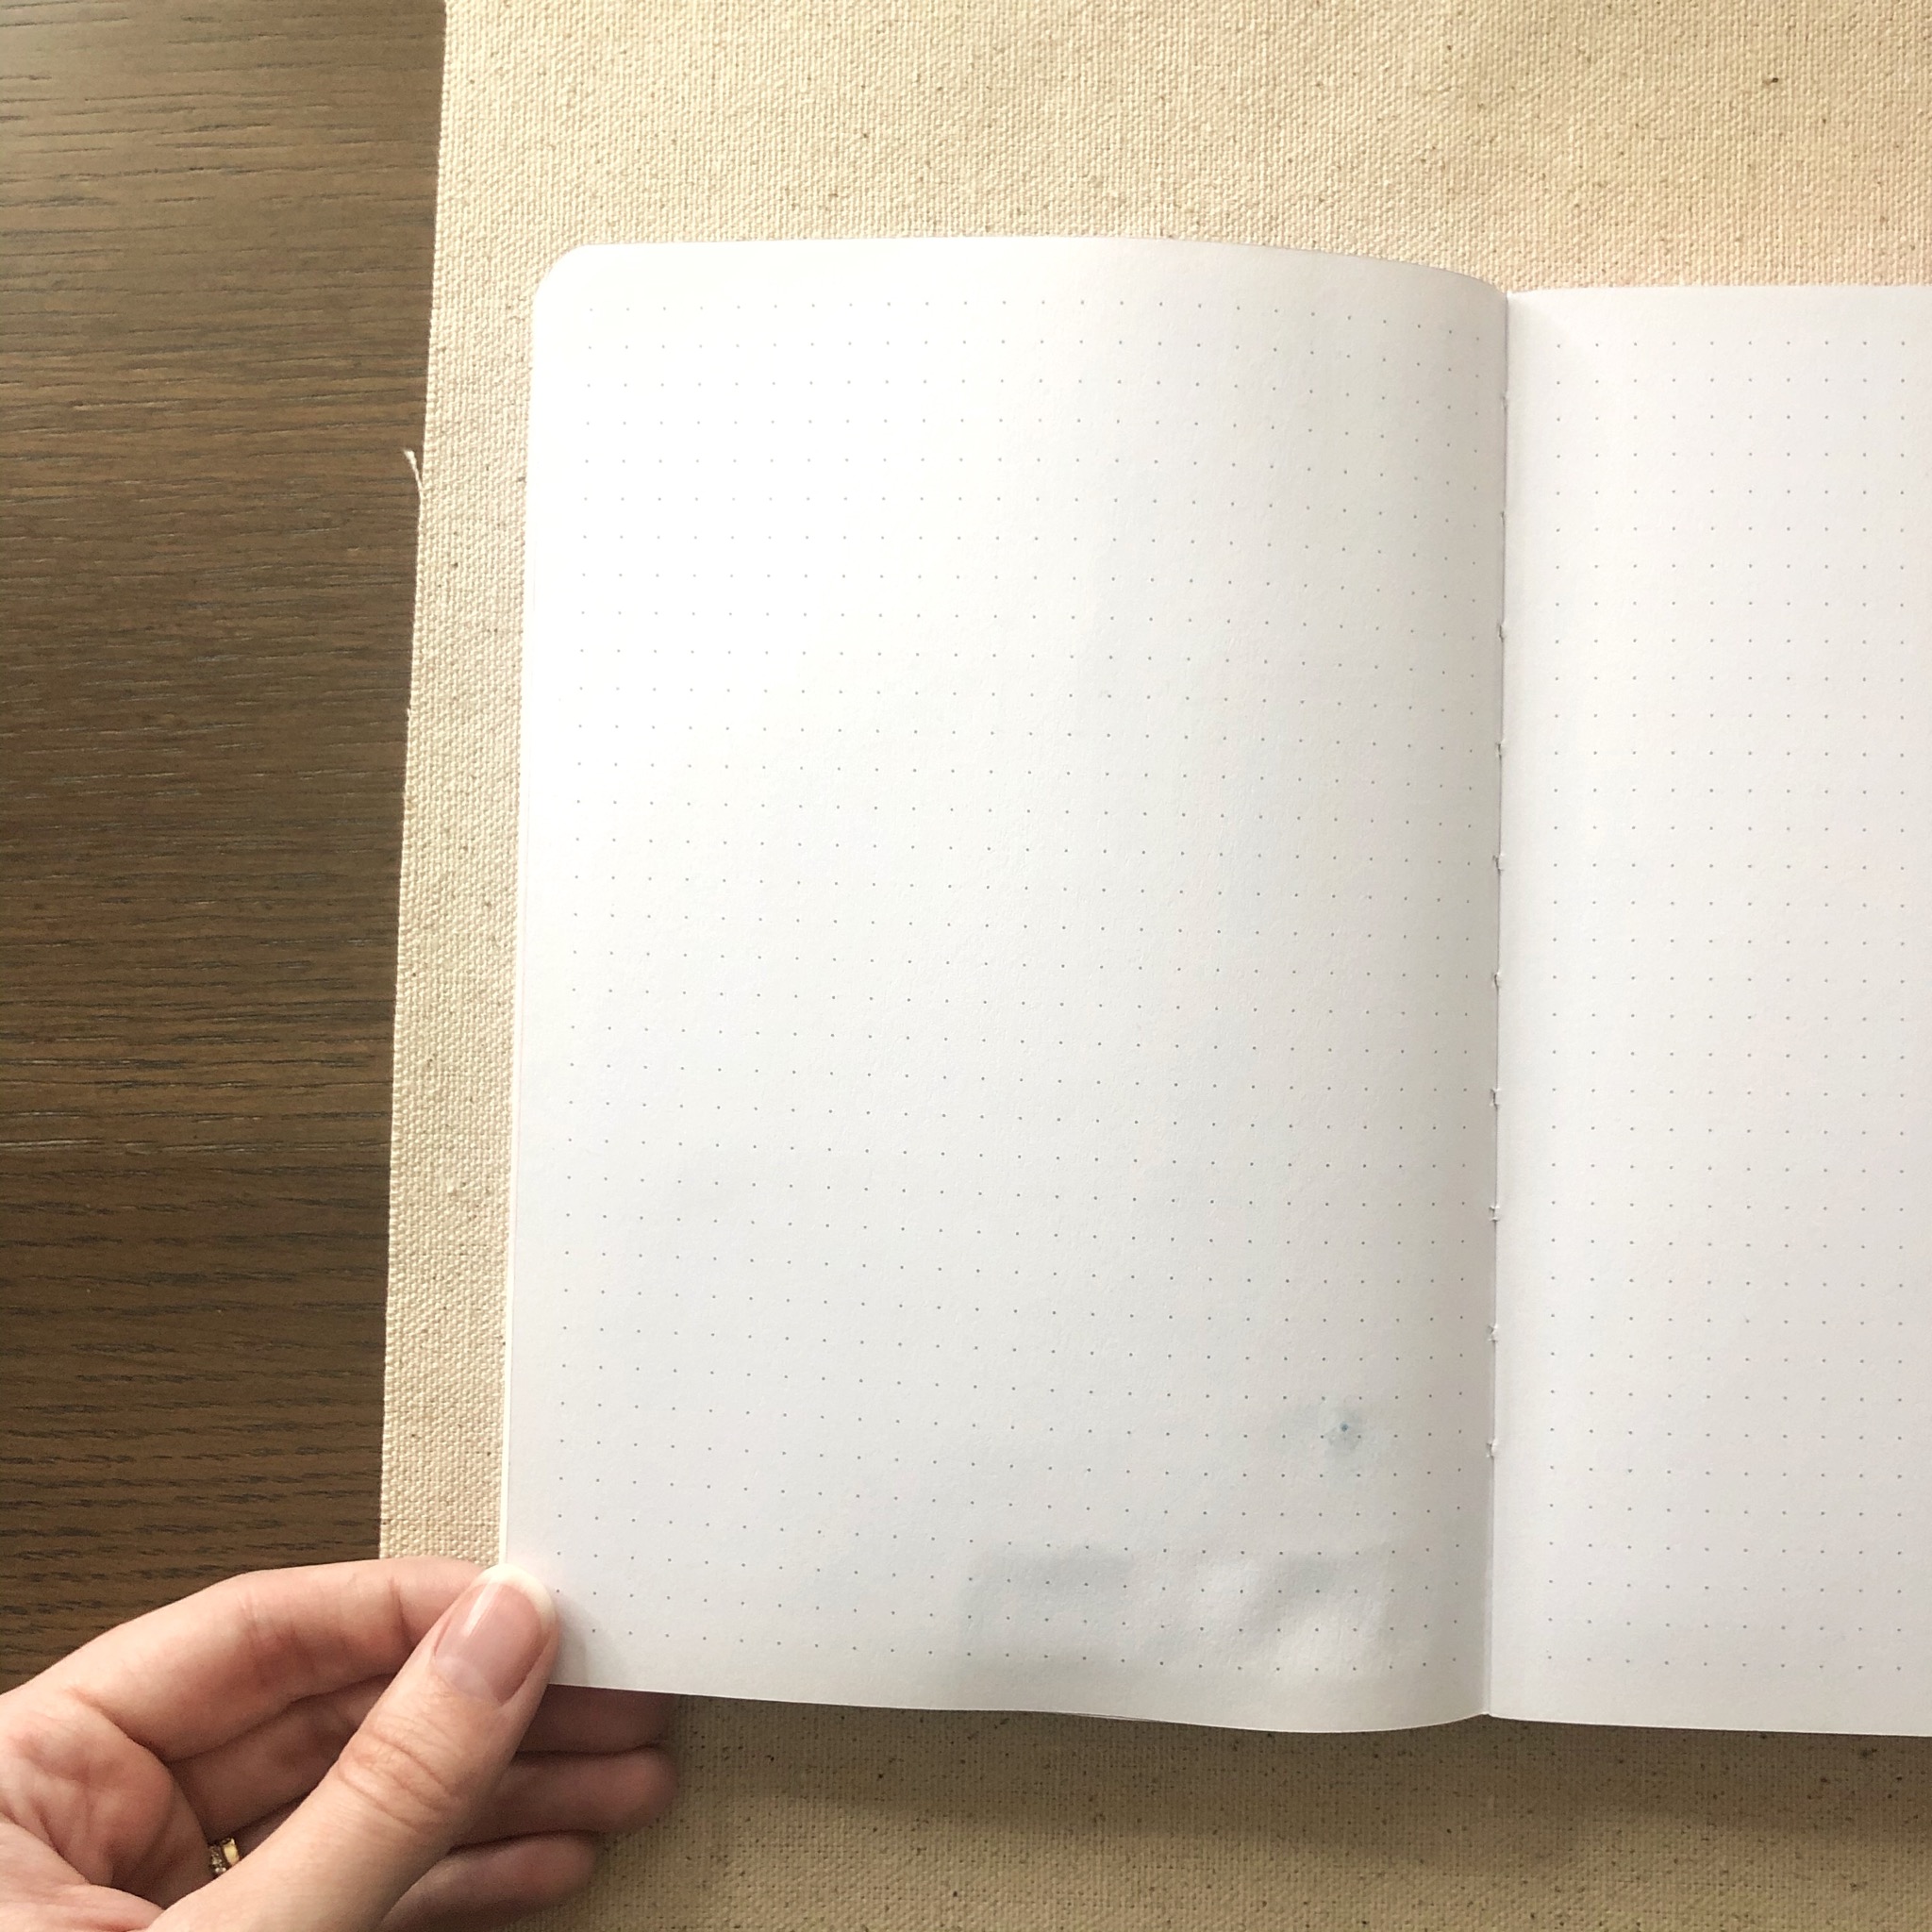 Review of Notebook Therapy 160 GSM Dotted Notebook and bullet journaling  stencils